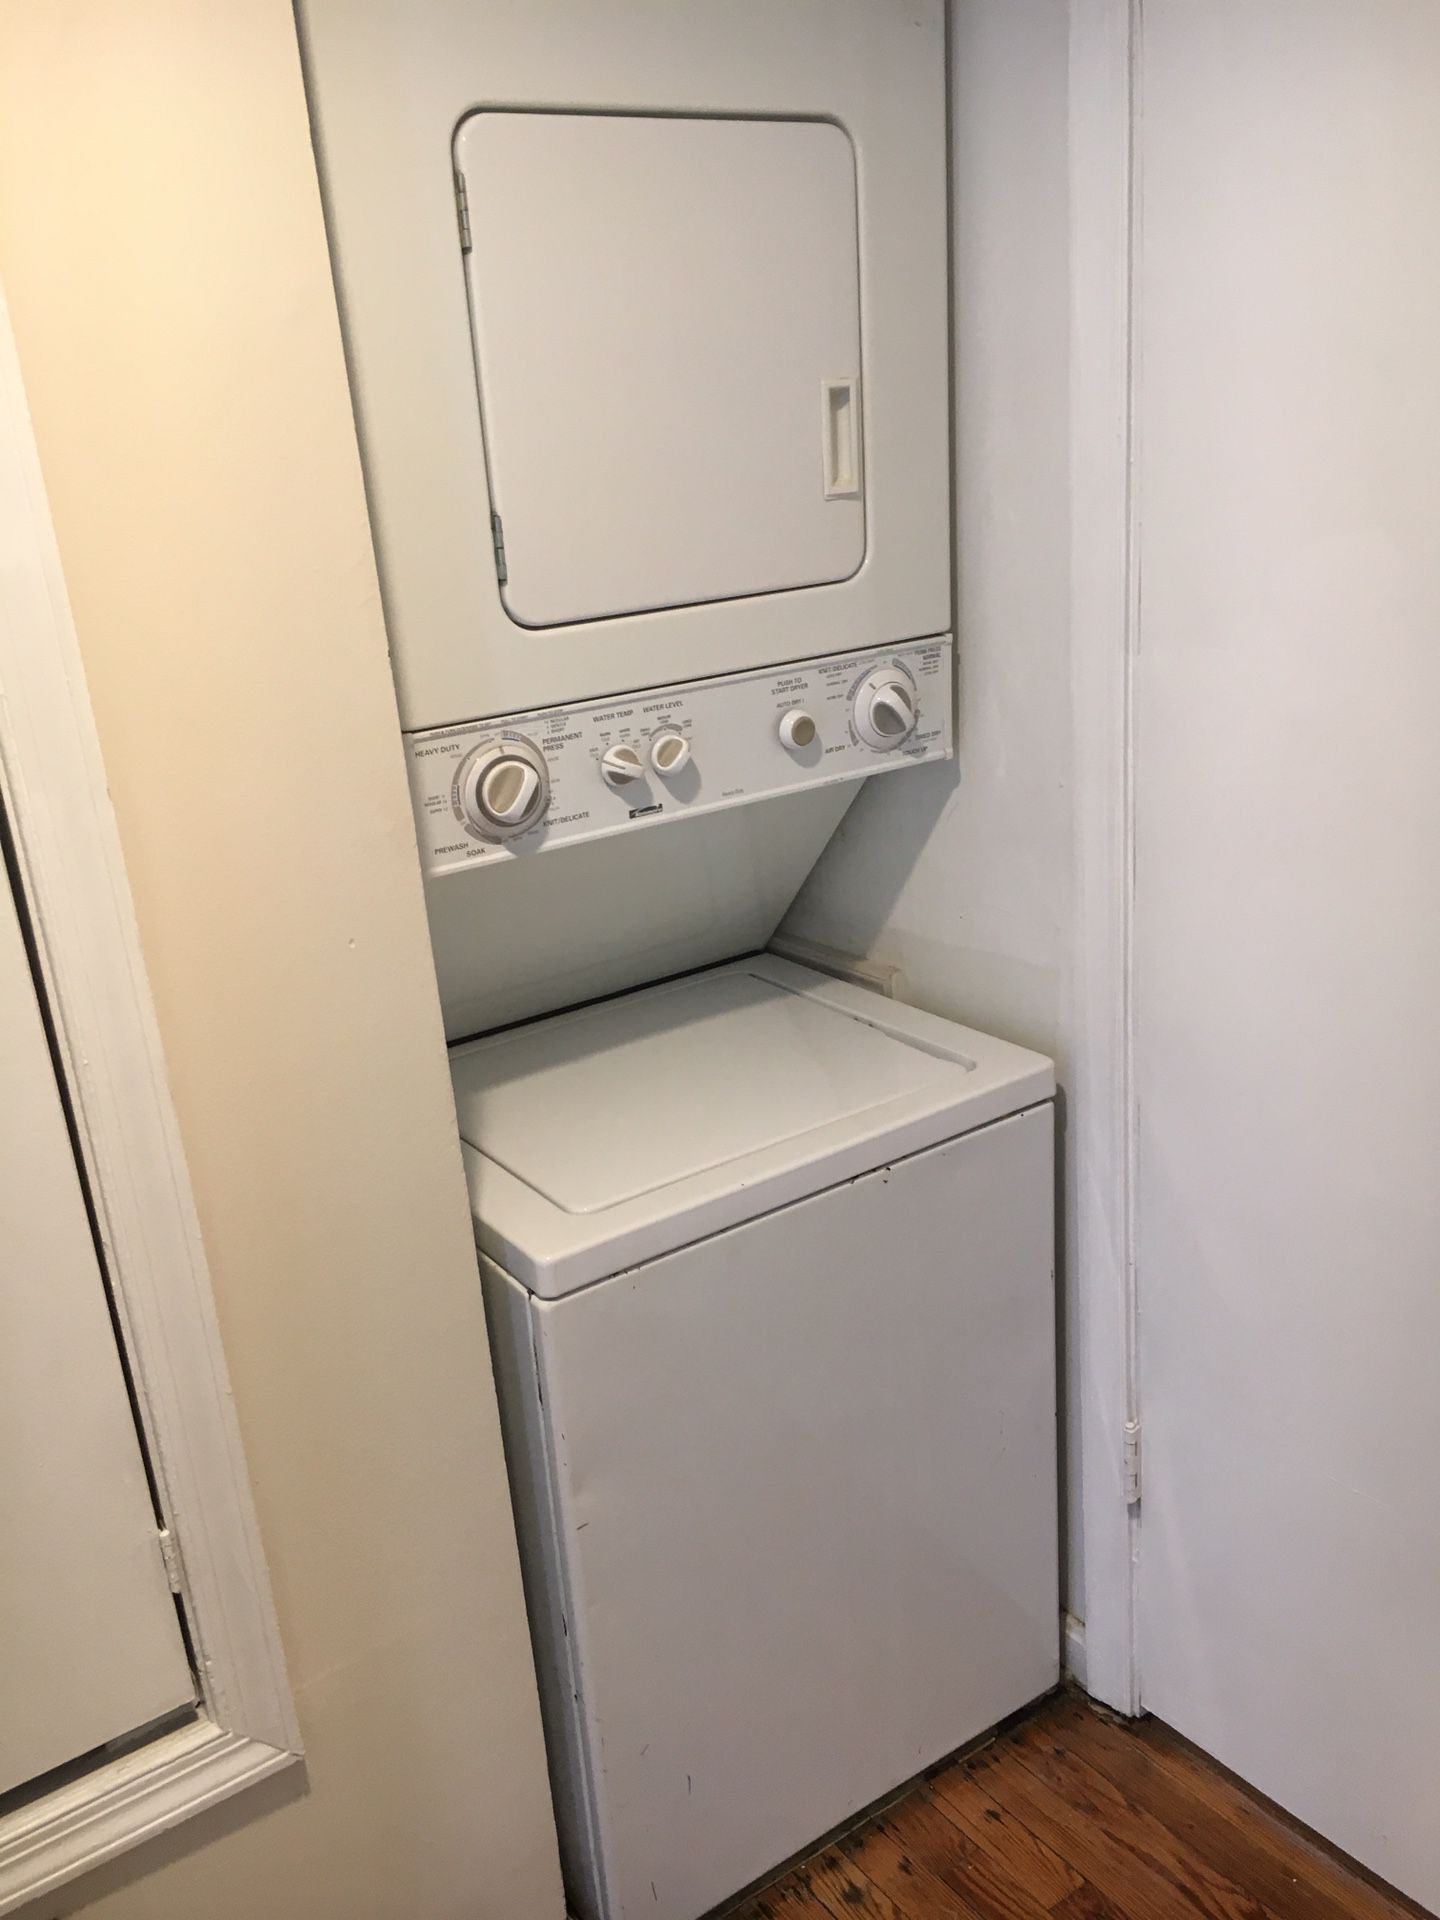 Kenmore stacked washer/dryer